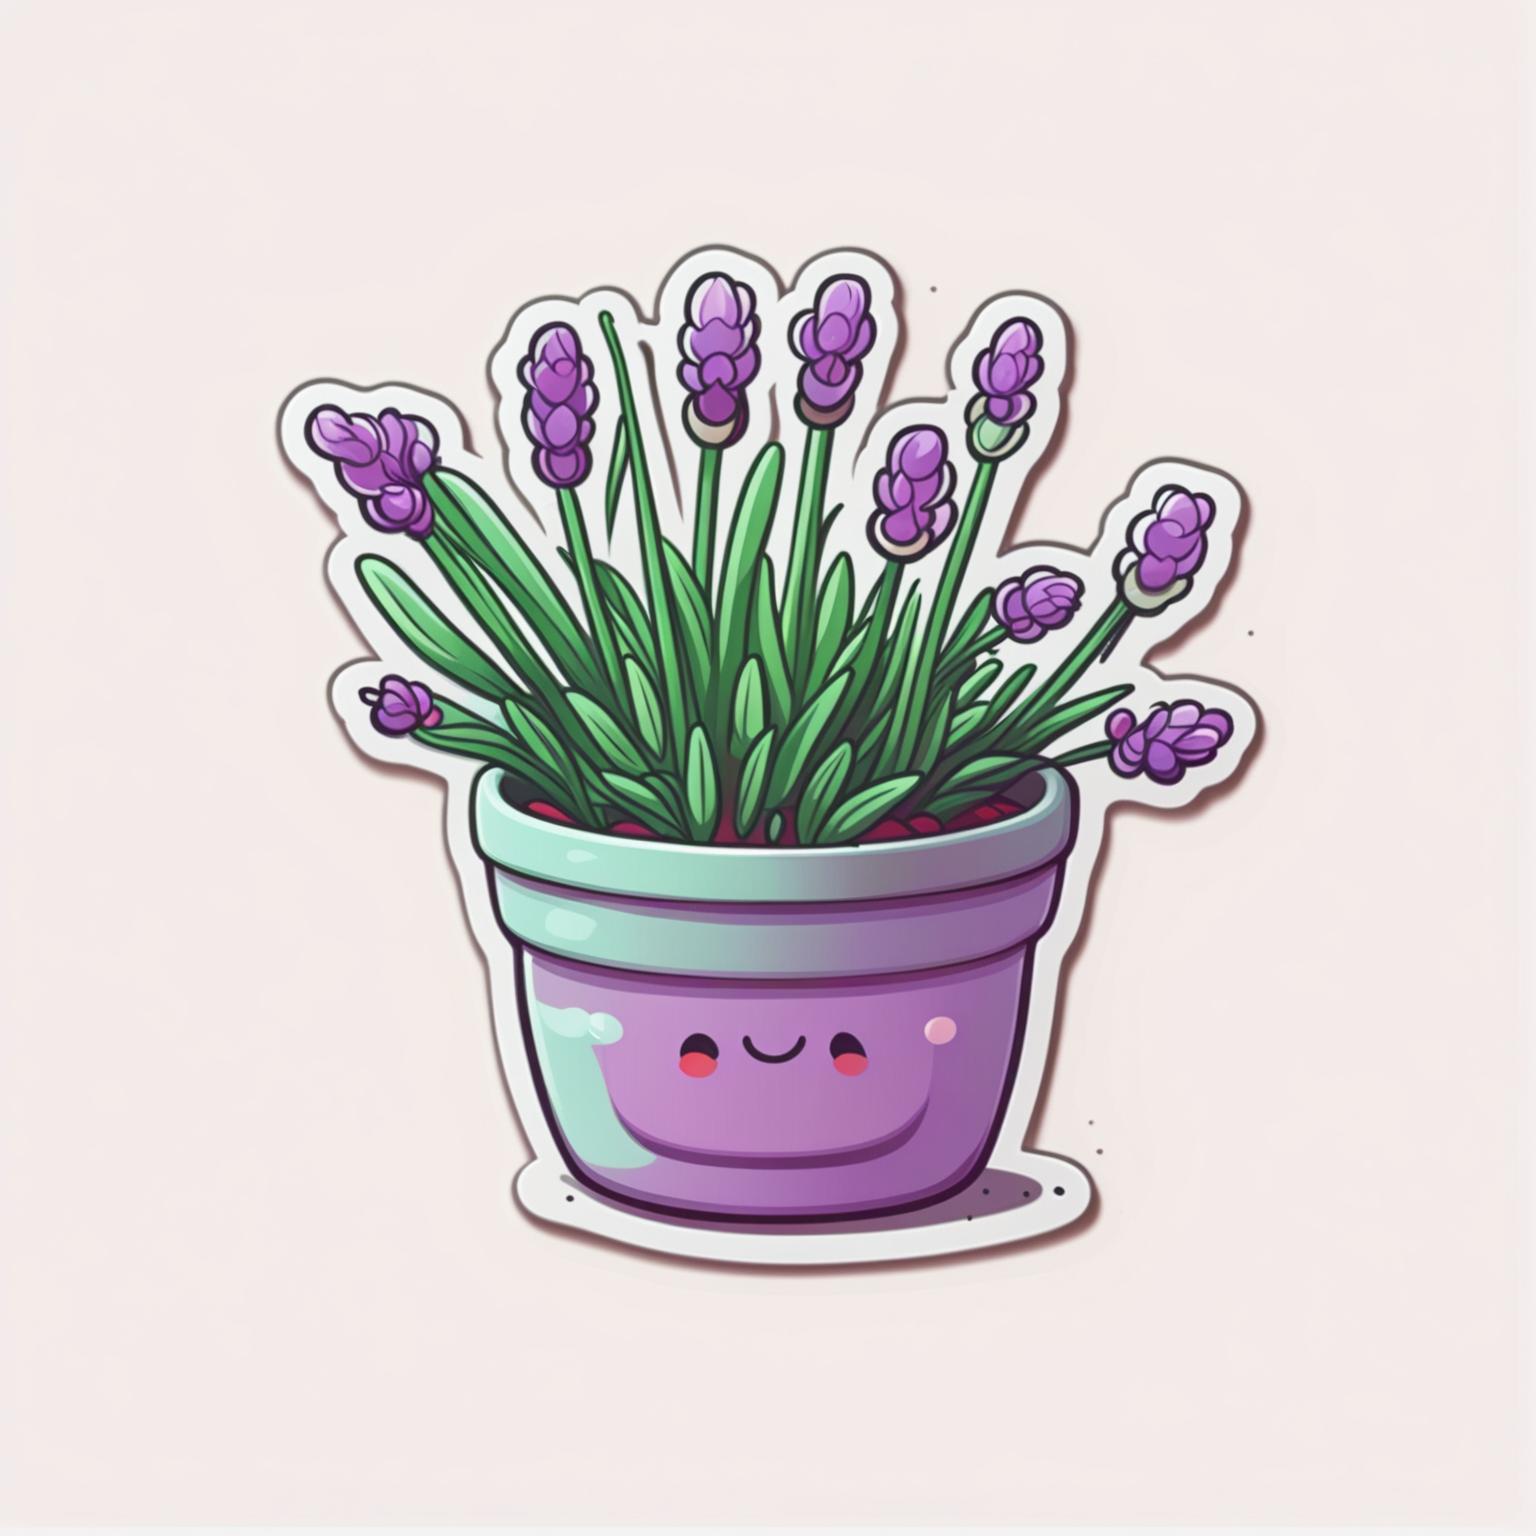 Design a cute Lavender plant sticker with slender green stems and vibrant purple flowers